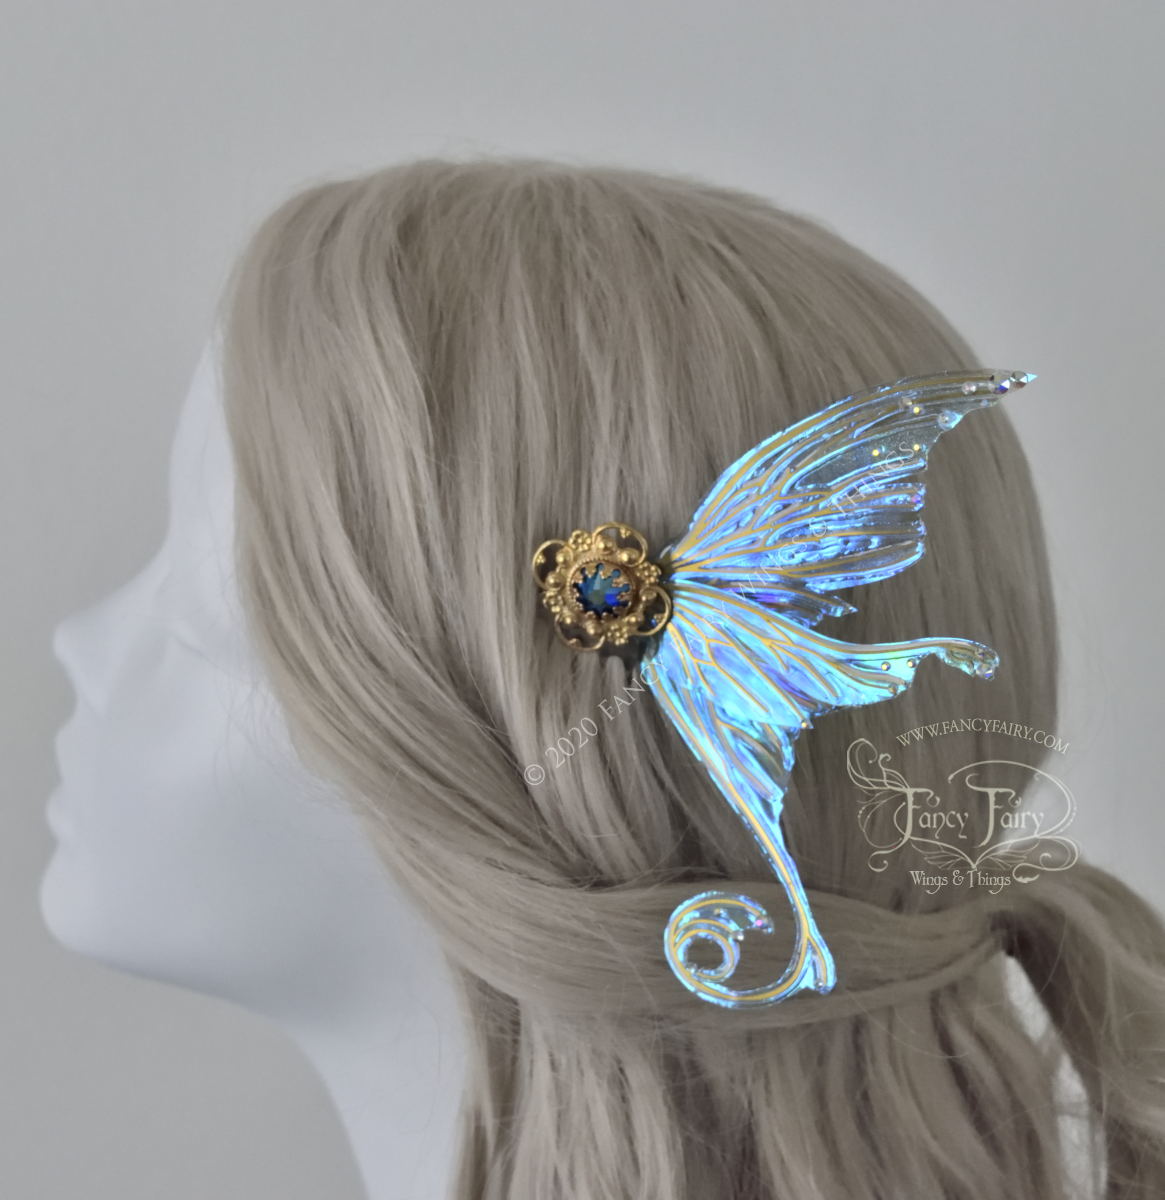 Aphrodite 3 and 1/5 inch Aquamarine Fairy Wing Hair Combs with Silver Veins